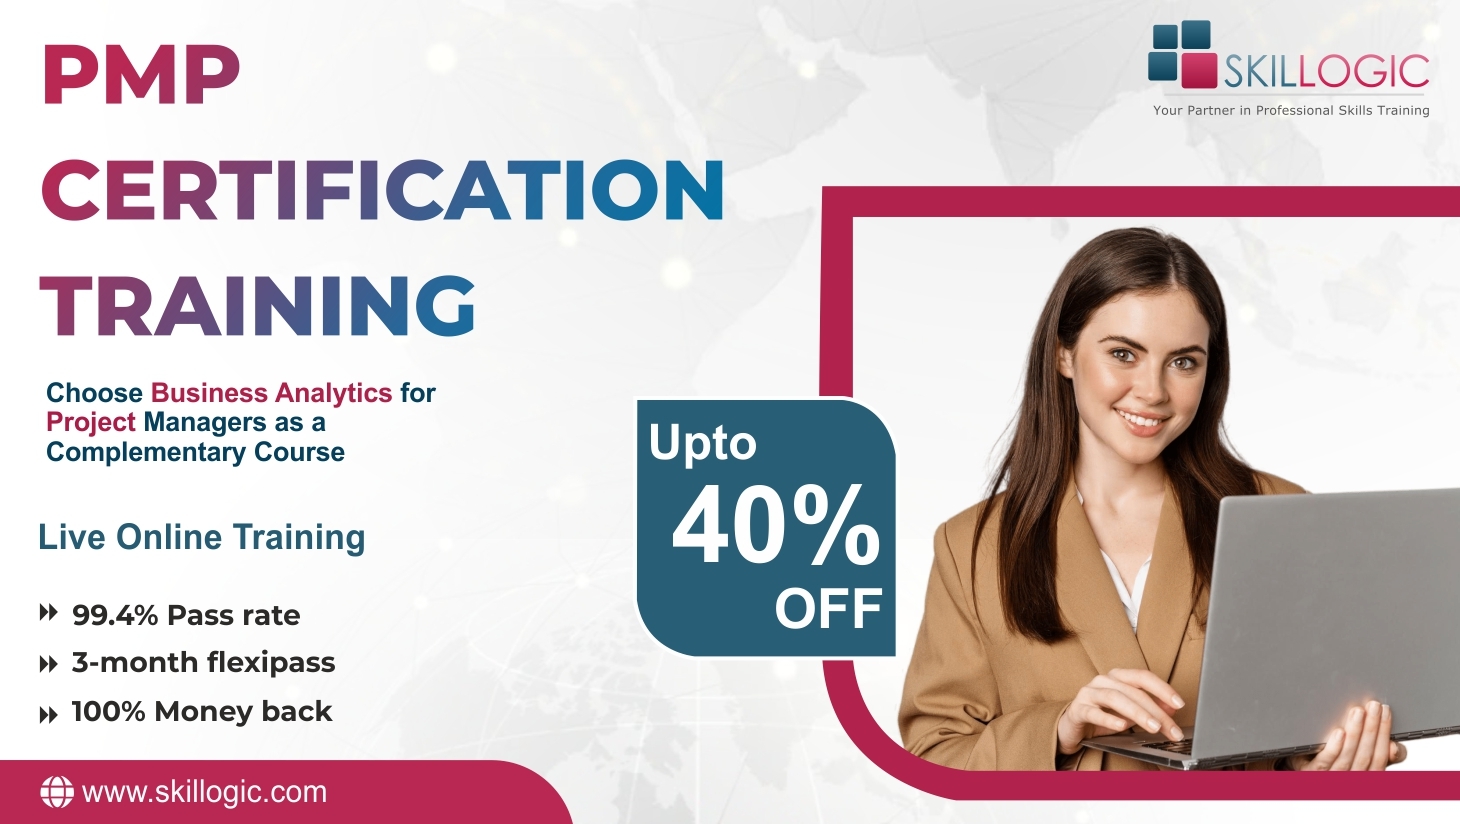 PMP Training Course in Trivandrum, Online Event